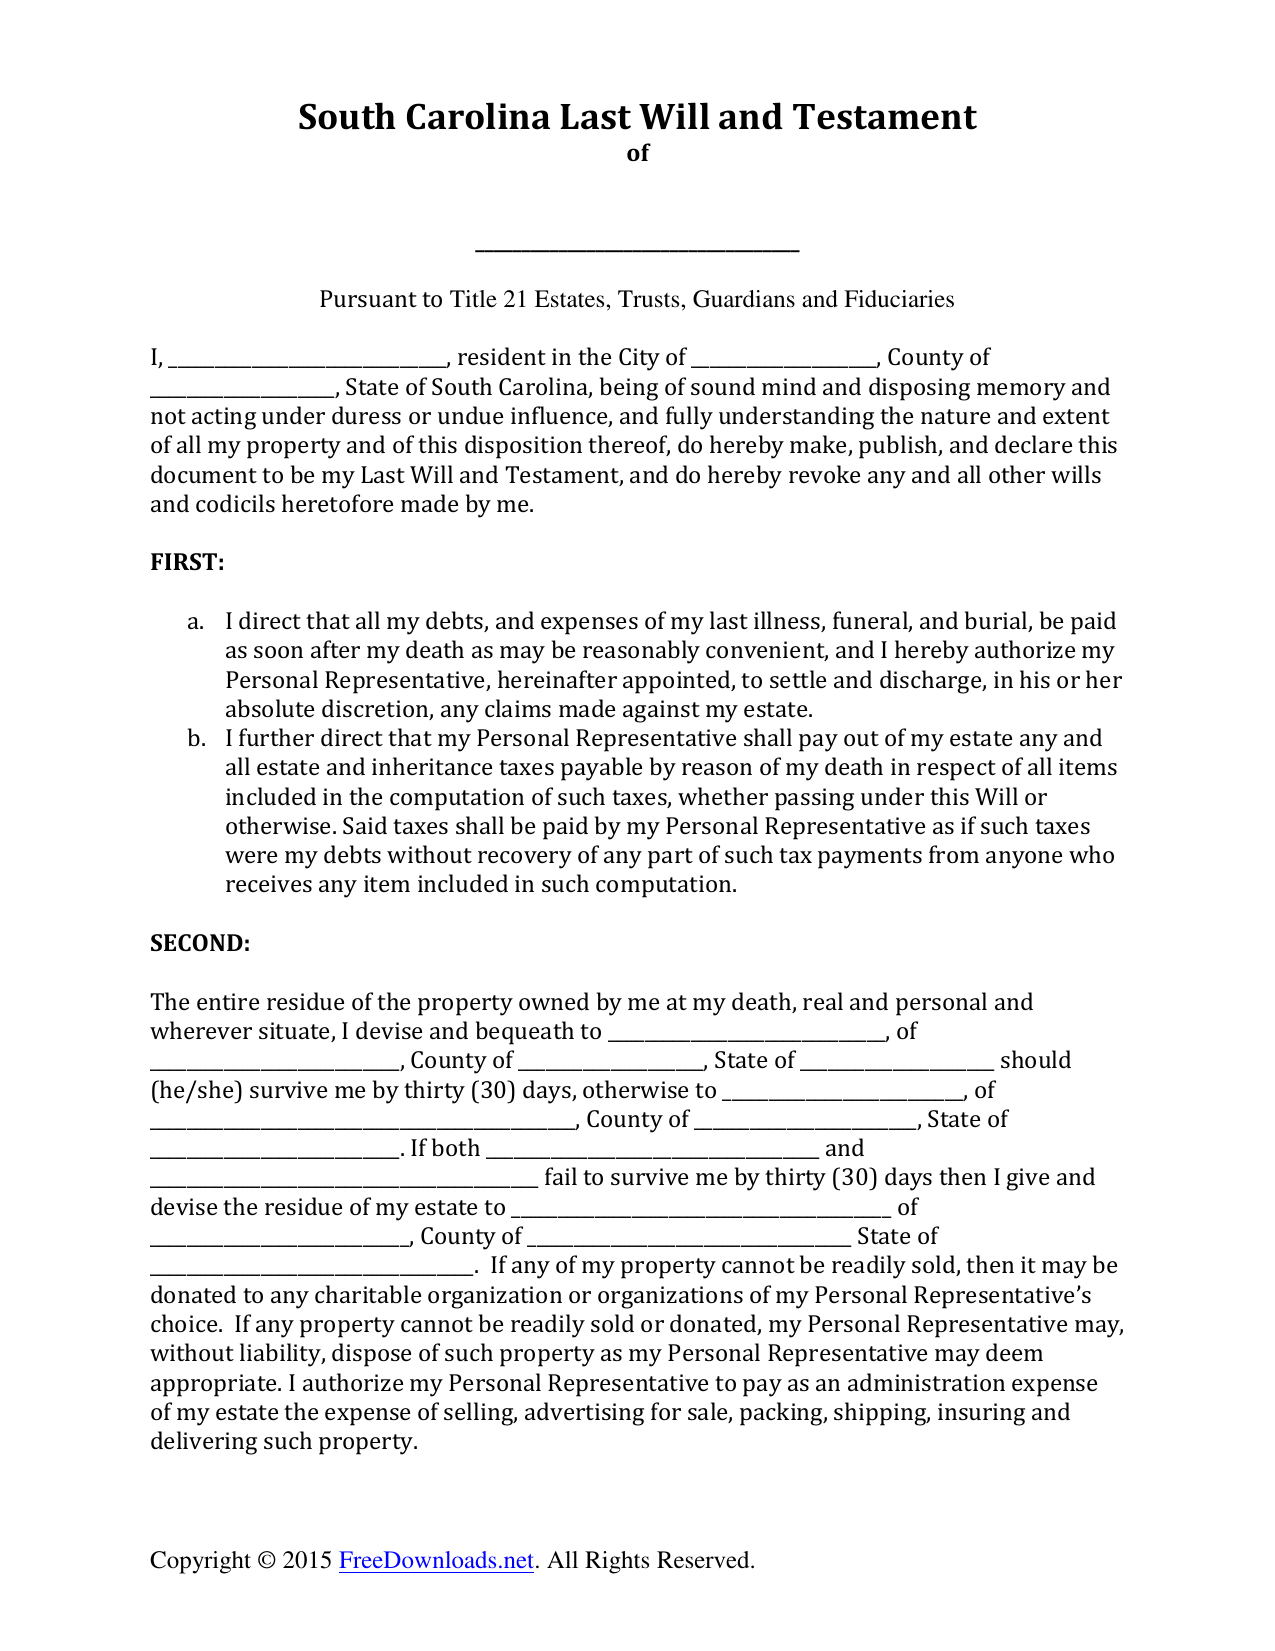 Download South Carolina Last Will and Testament Form PDF Word